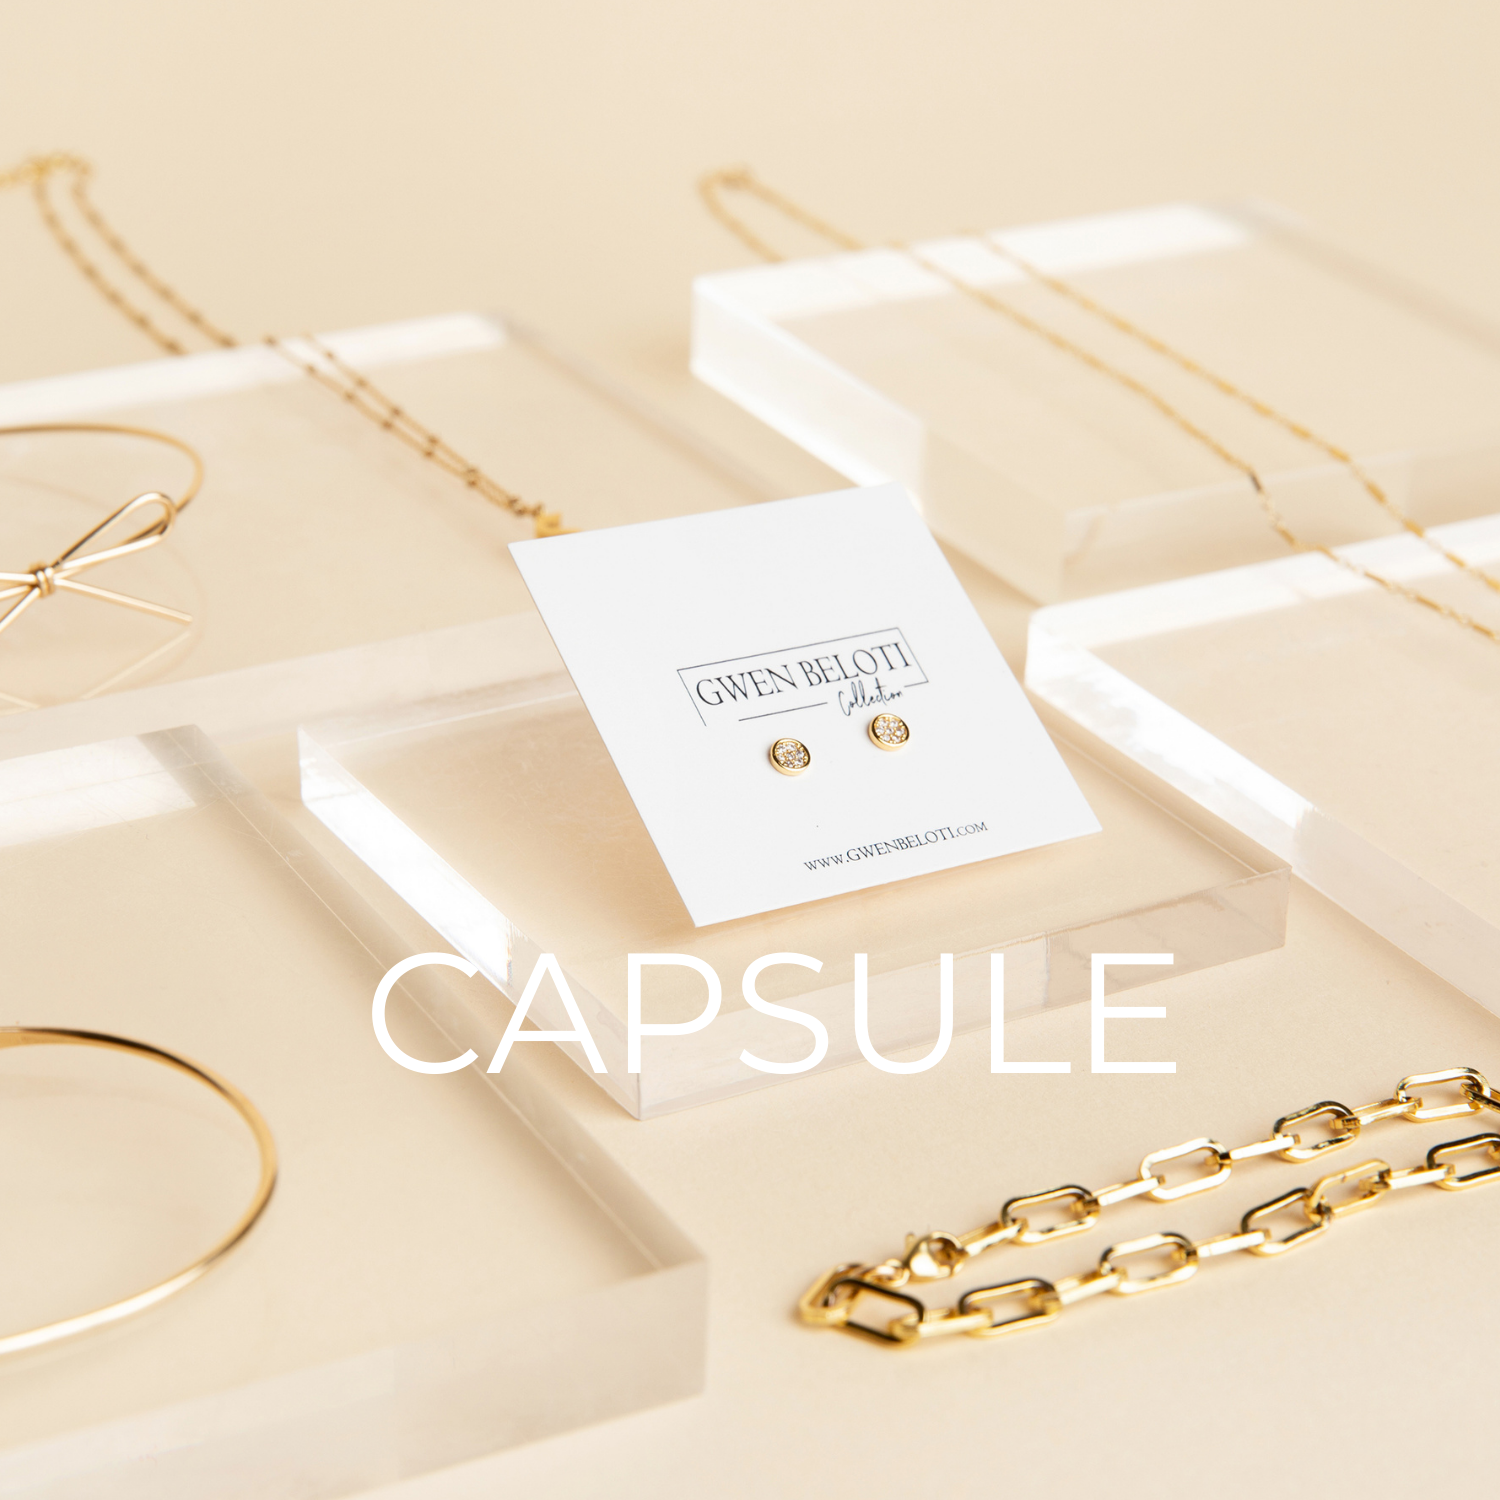 YOUR CAPSULE COLLECTION